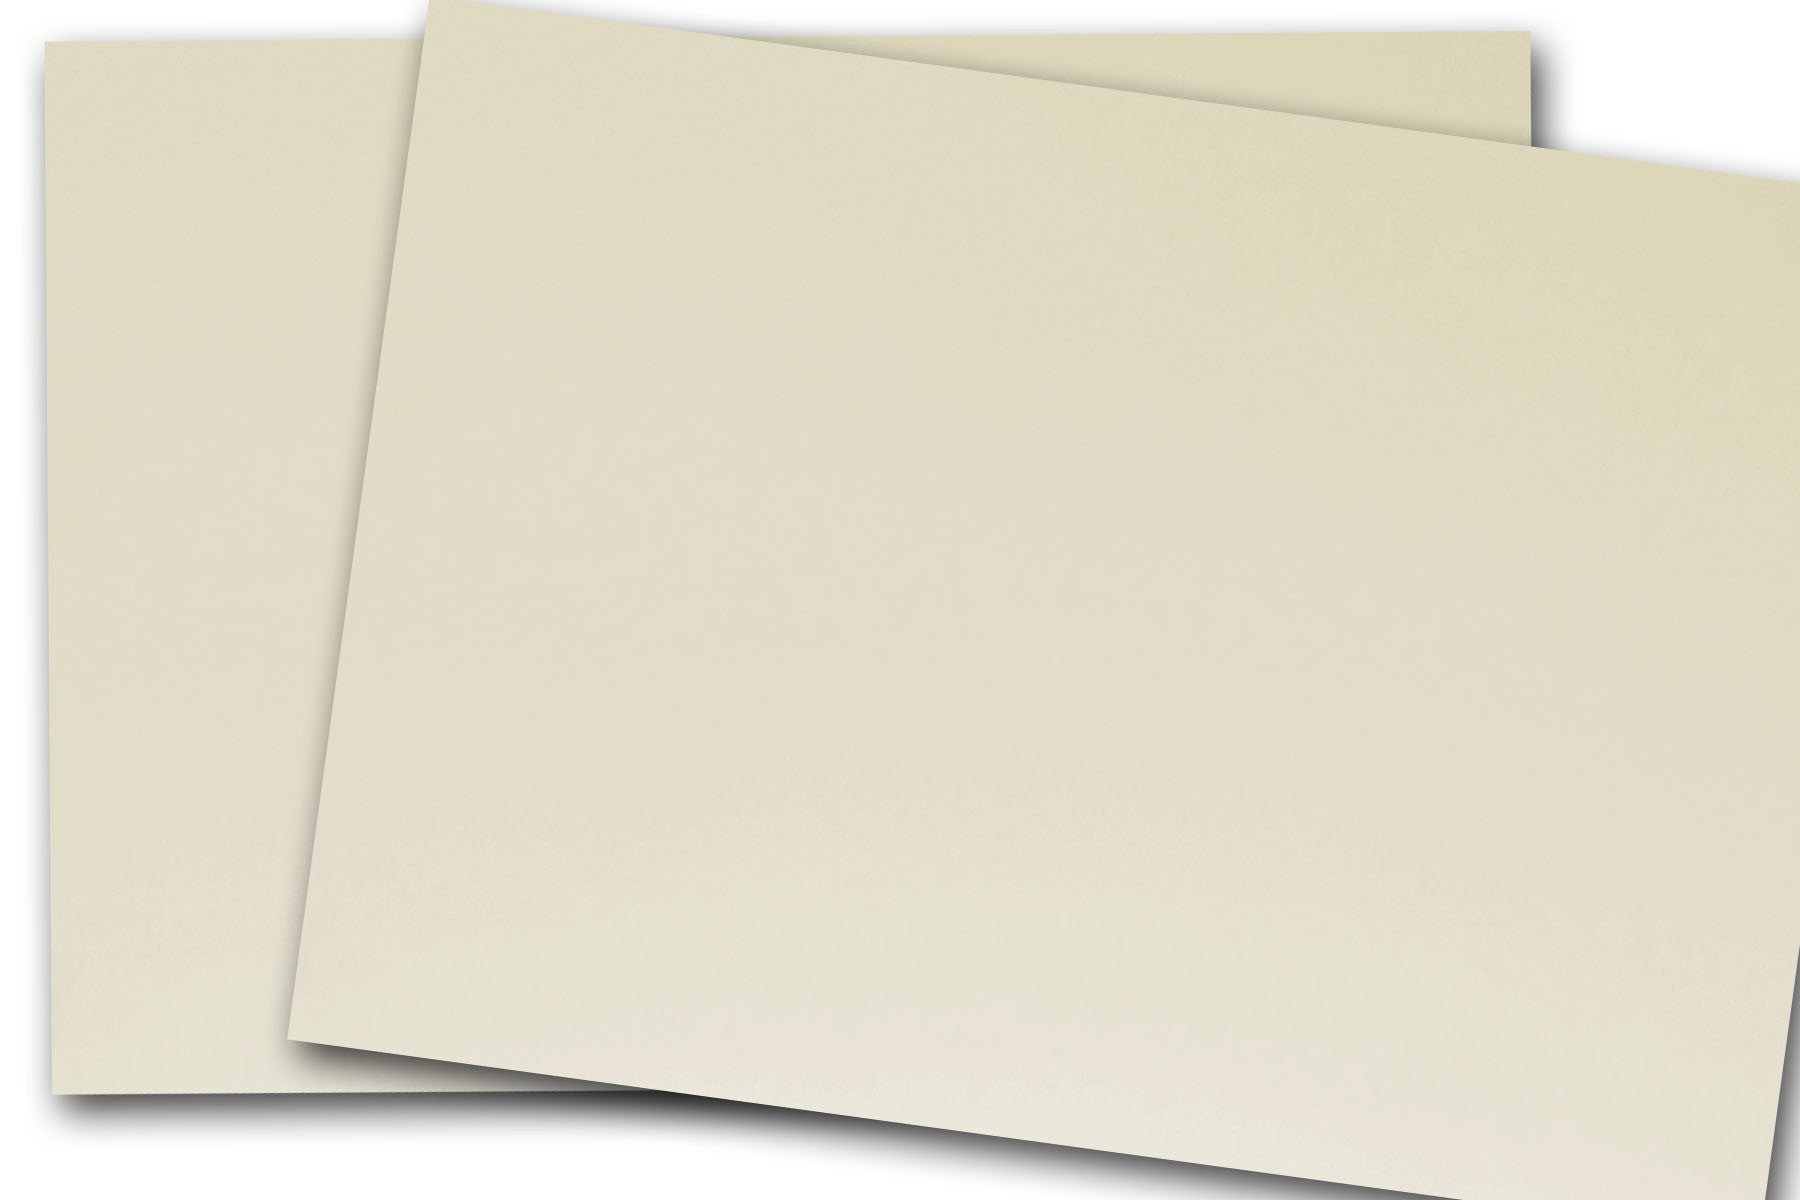 White Heavyweight - Extra Thick Card Stock Paper